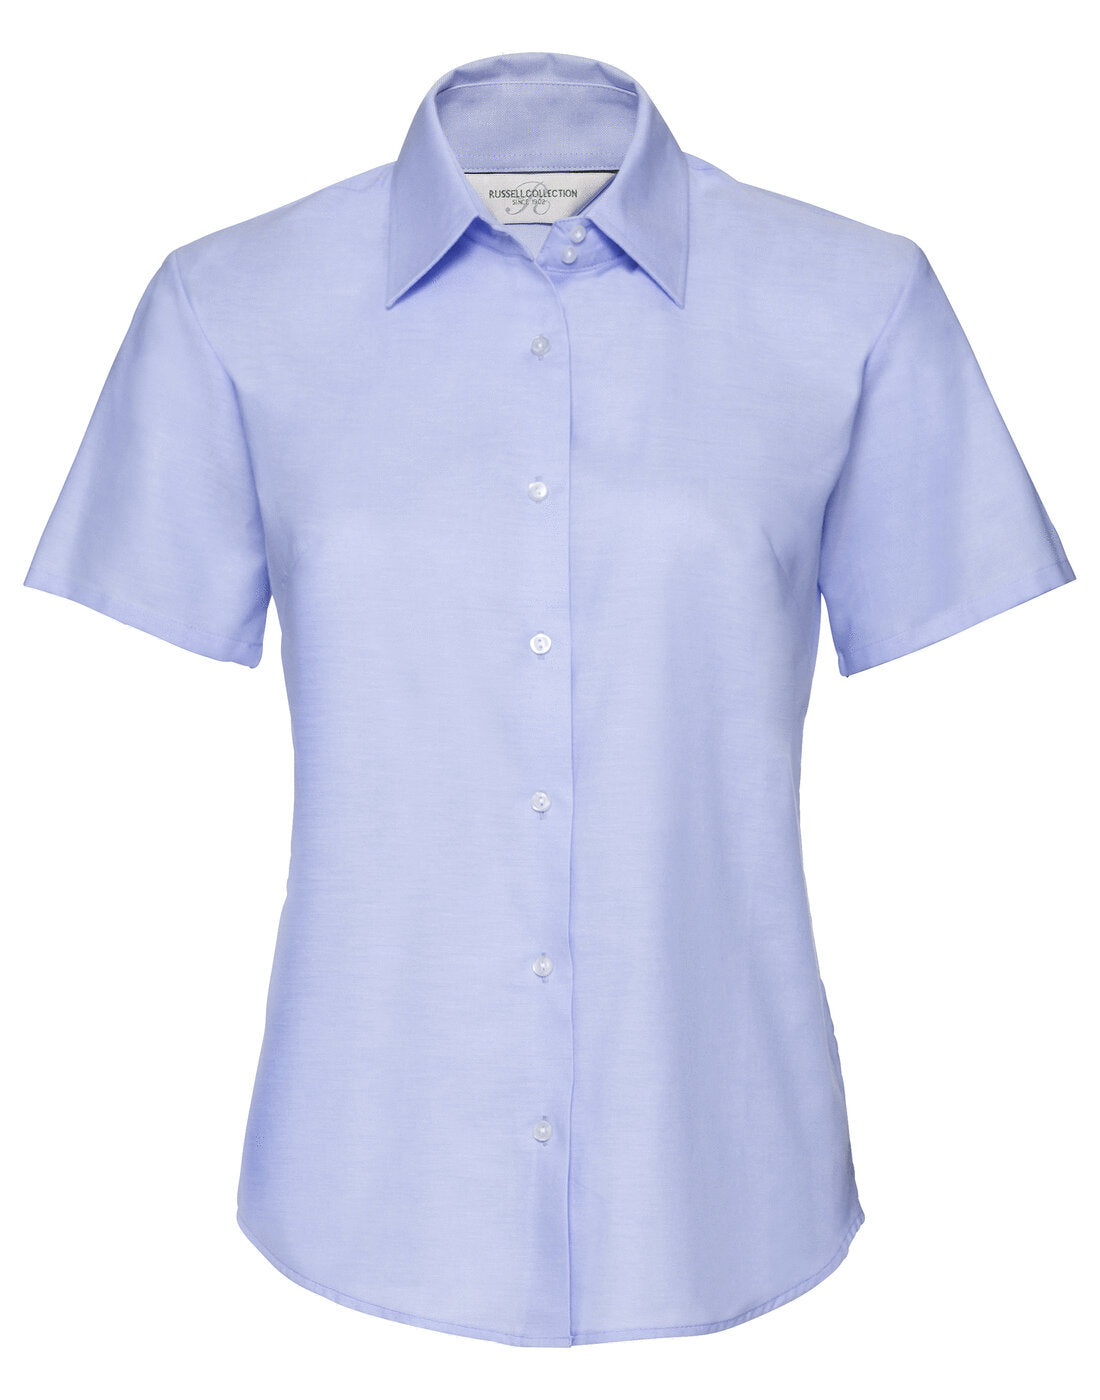 Russell Ladies Short Sleeve Tailored Oxford Shirt Oxford Blue